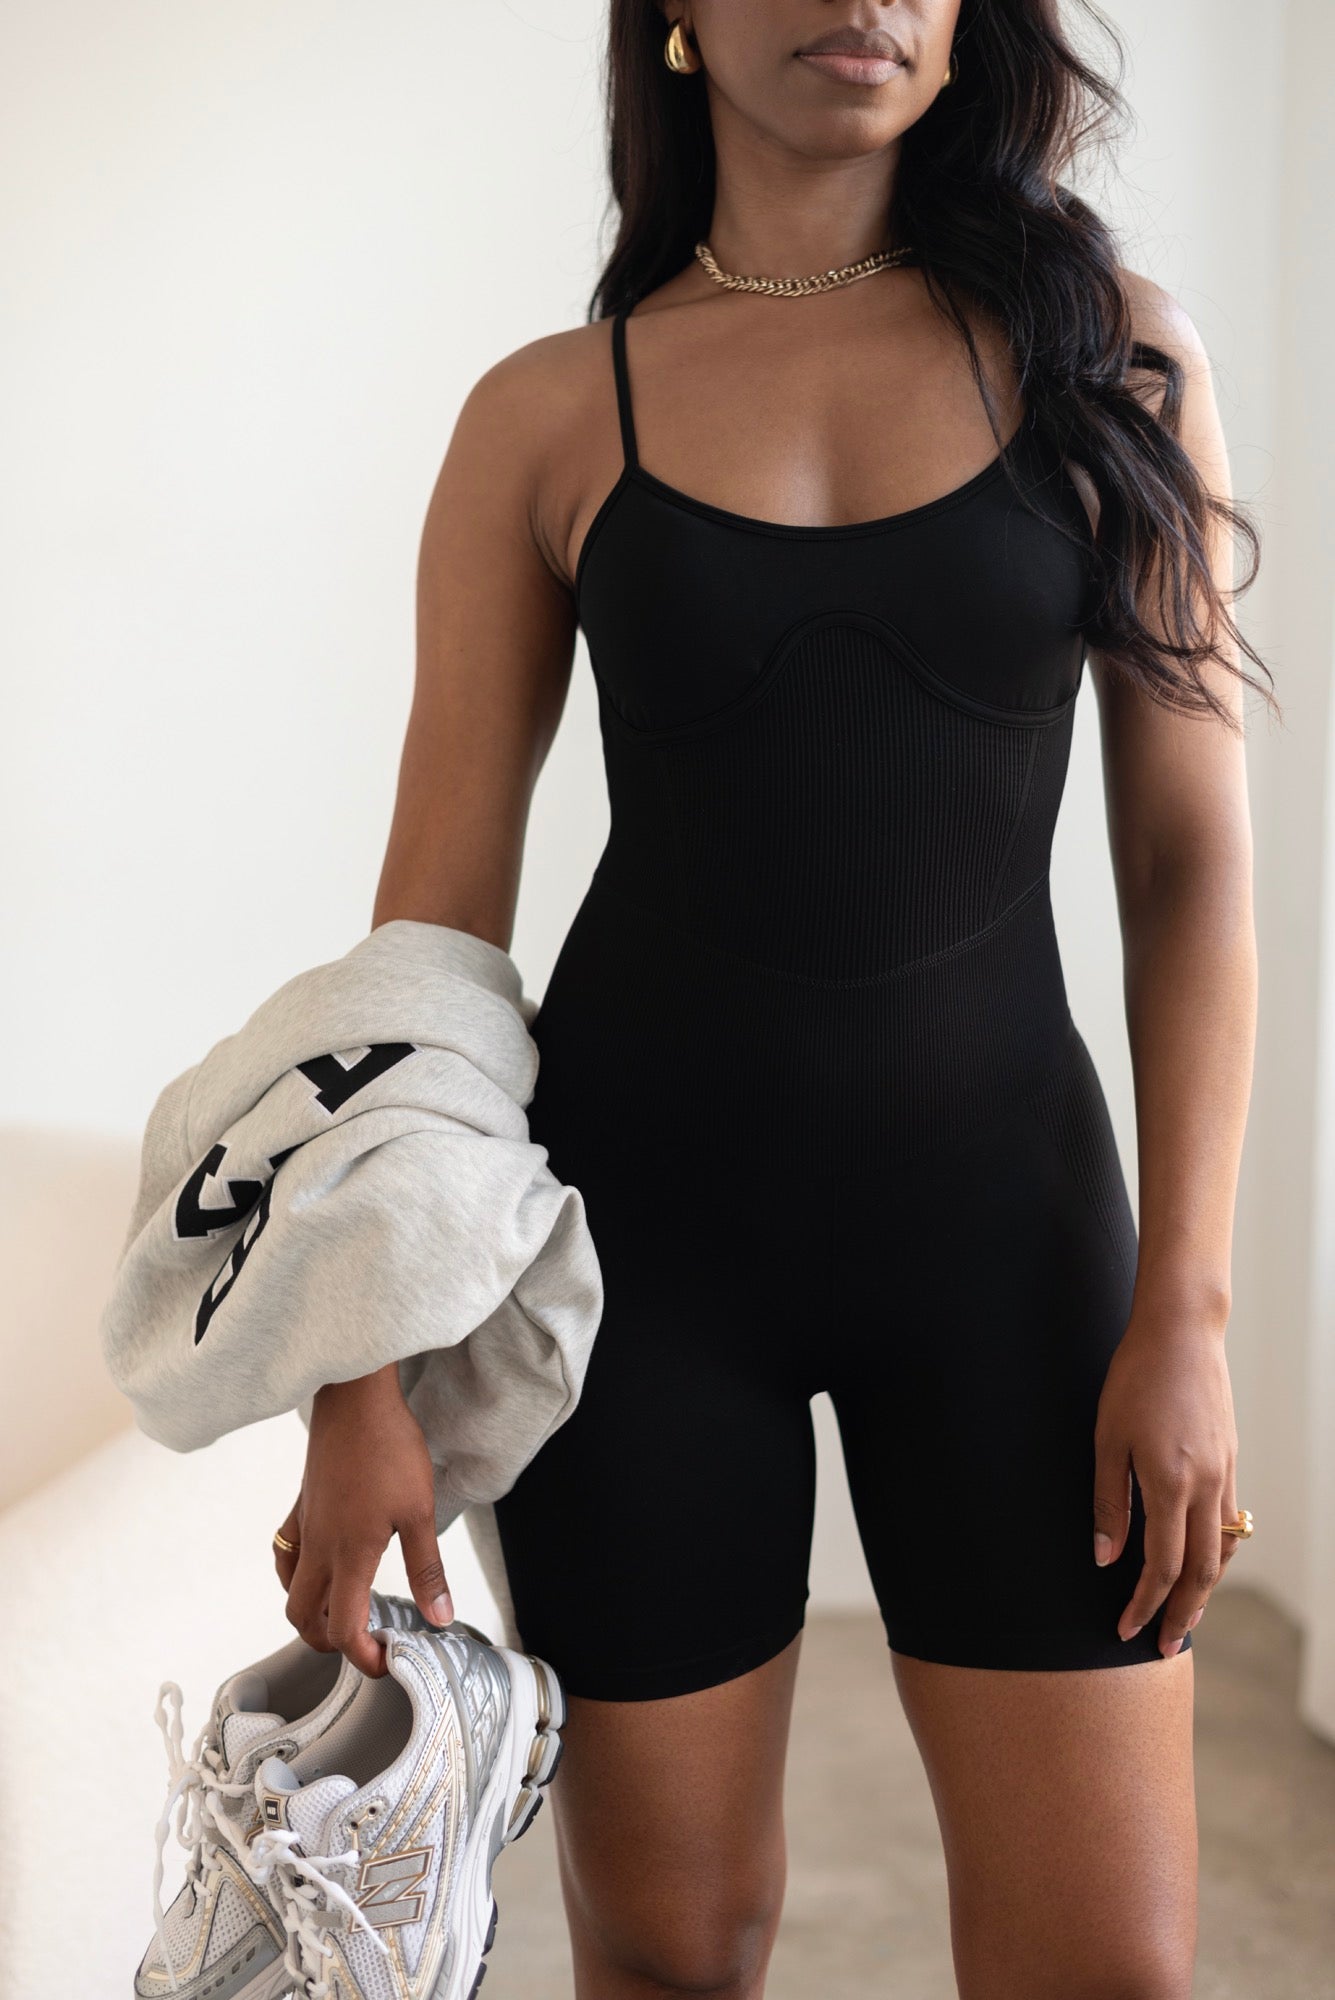 Starlight Jumpsuit en Negro-Jumpsuits-Tienda Ropa Leggings Yoga Sostenibles Reciclados Mujer On-line Barcelona Believe Athletics Sustainable Recycled Yoga Clothes